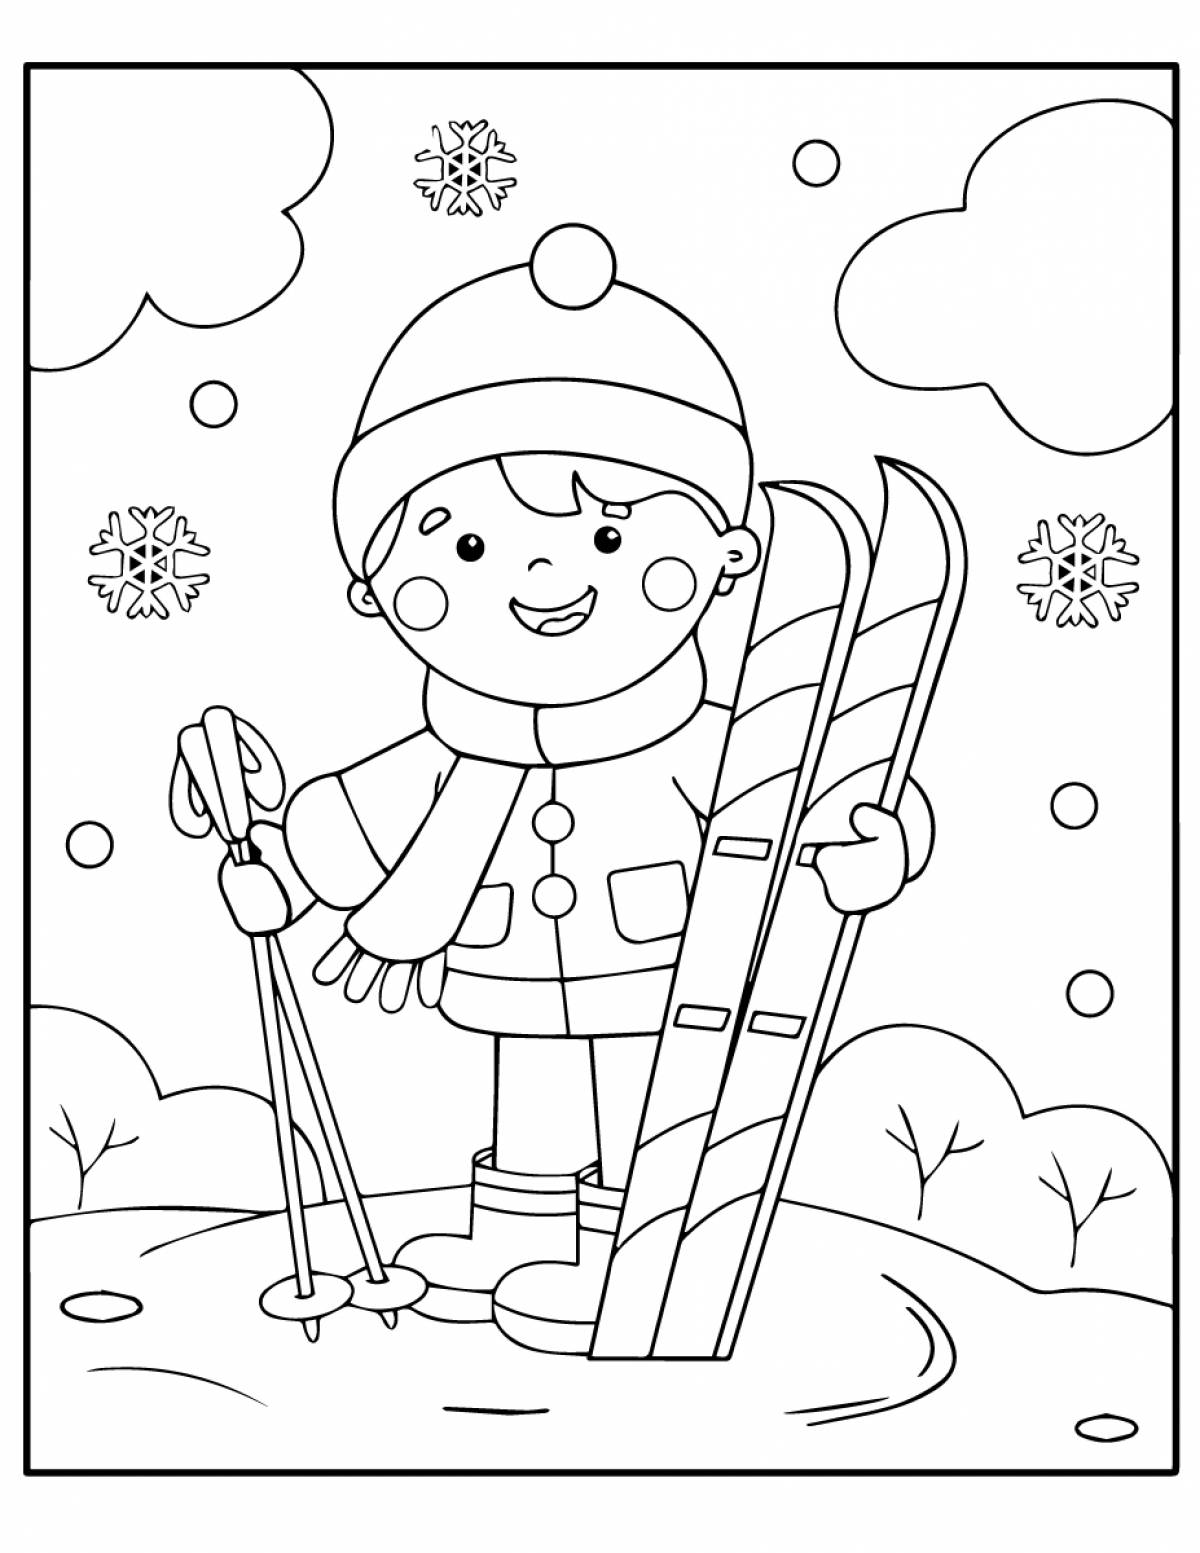 A fun coloring book for older skiers